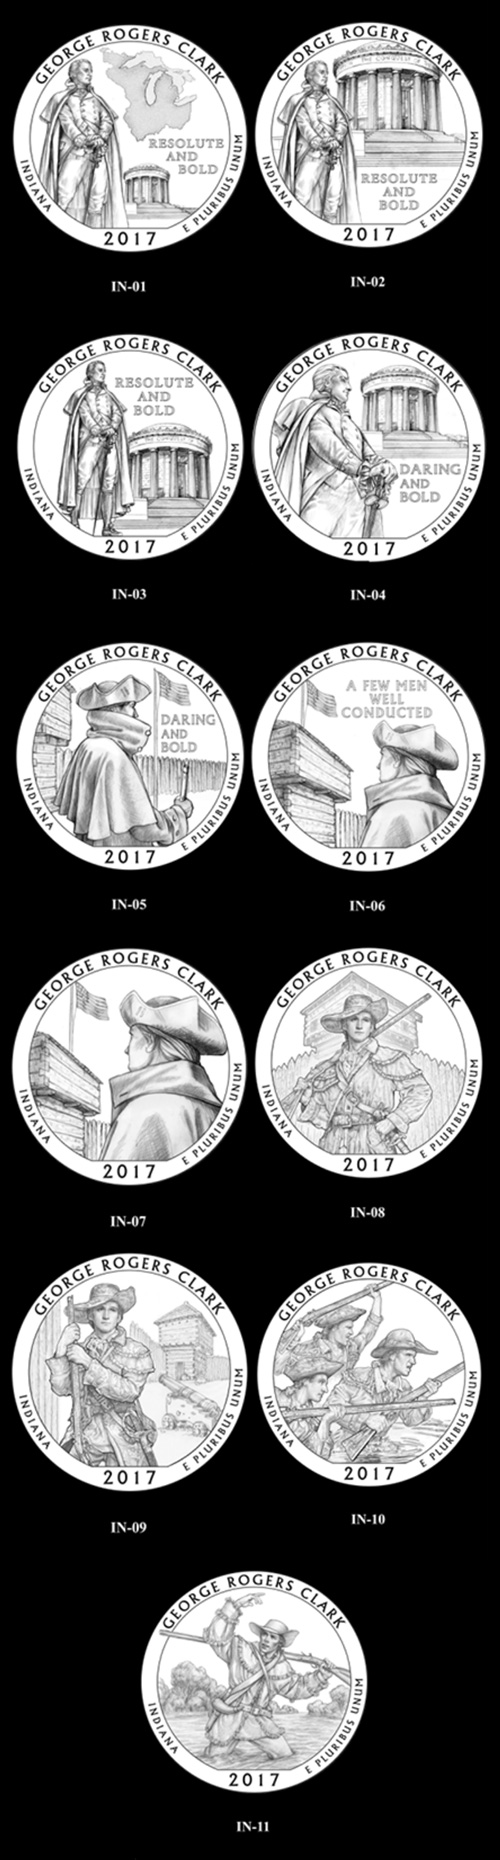 Candidate designs for the new 2017 George Rogers Clark National Historical Park quarter